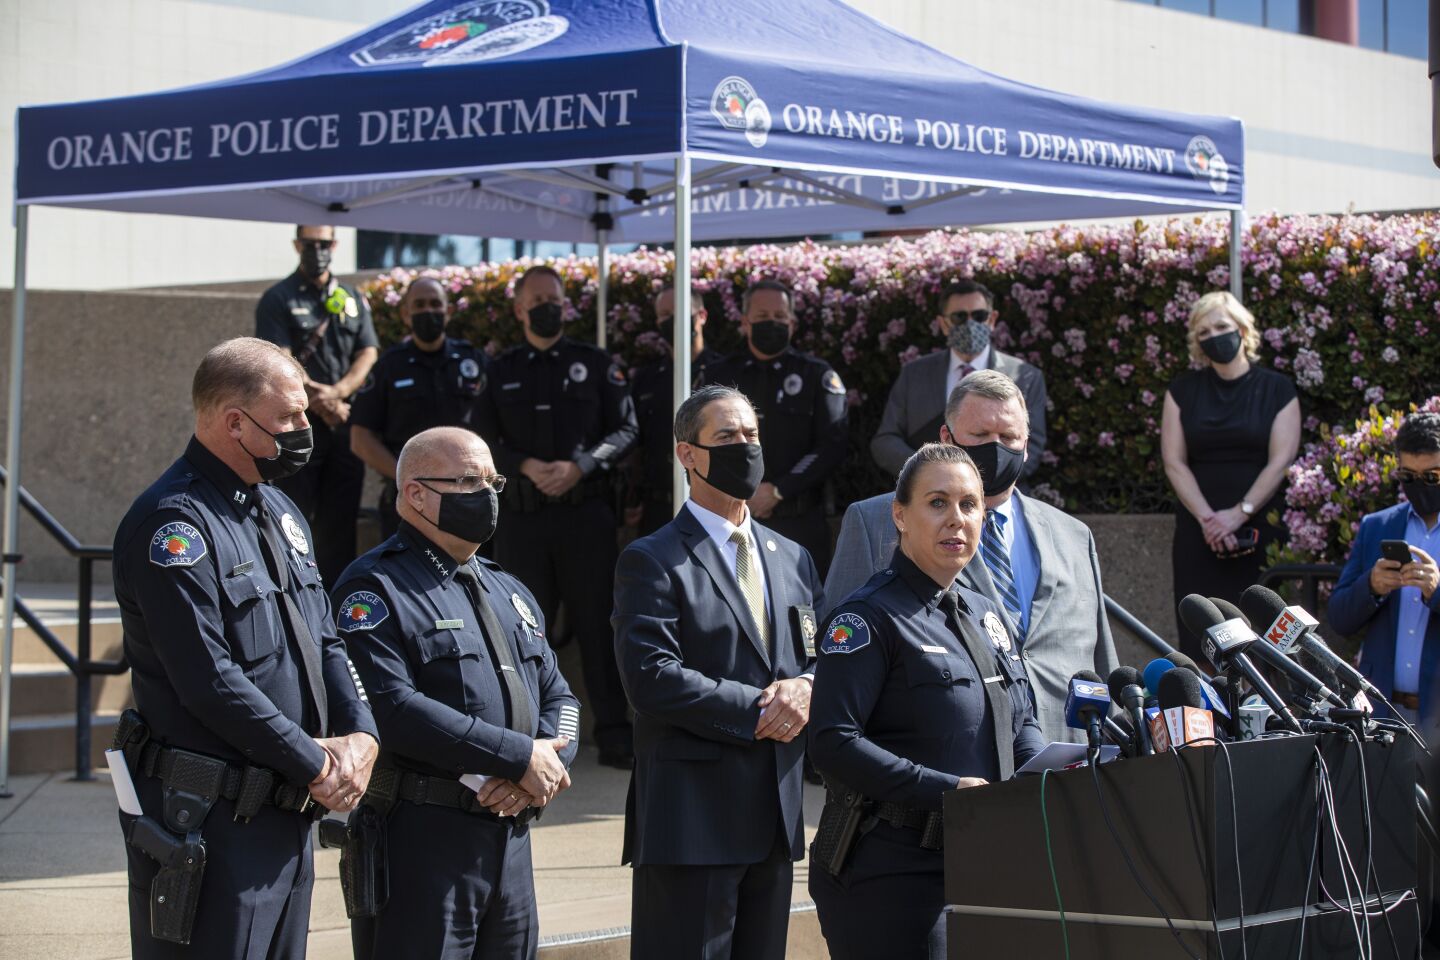 Jennifer Amat, with officers and detectives, speaks at a news conference.